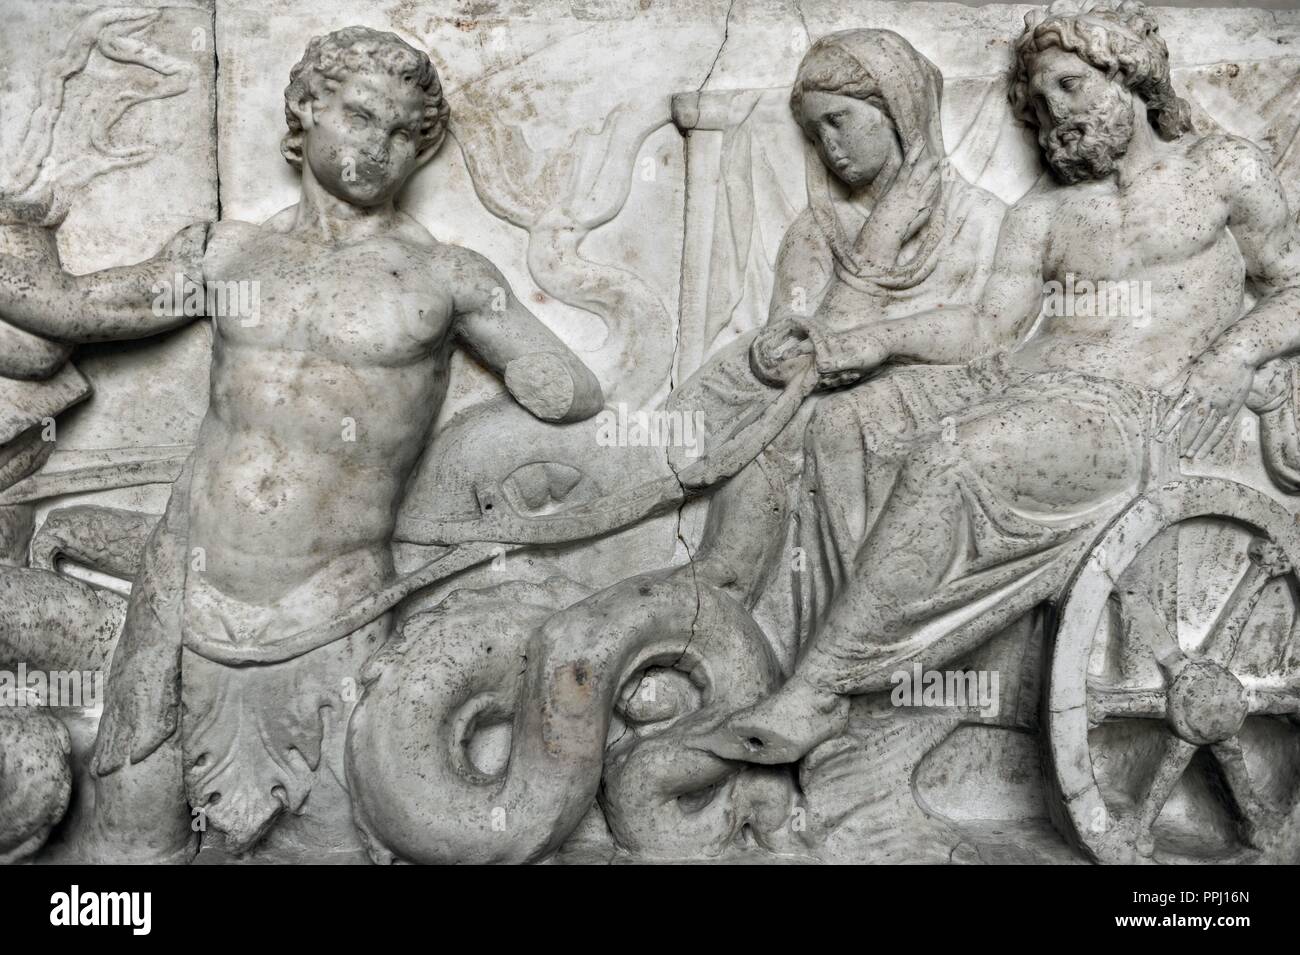 Roman Art. Altar of Domitius Ahenobarbus or ÒStatue Base of Marcus AntoniusÓ, relief freize of a monumental statue group base. Sea thiasos for the wedding of Poseidon and Amphitrite, 2nd half of the 2nd century BC. (about 150 B.C.). Detail: Poseidon and Amphitrite in the bridal carriage, drawn by two Tritons playing music. (front panel). Glyptothek. Munich. Germany. Stock Photo